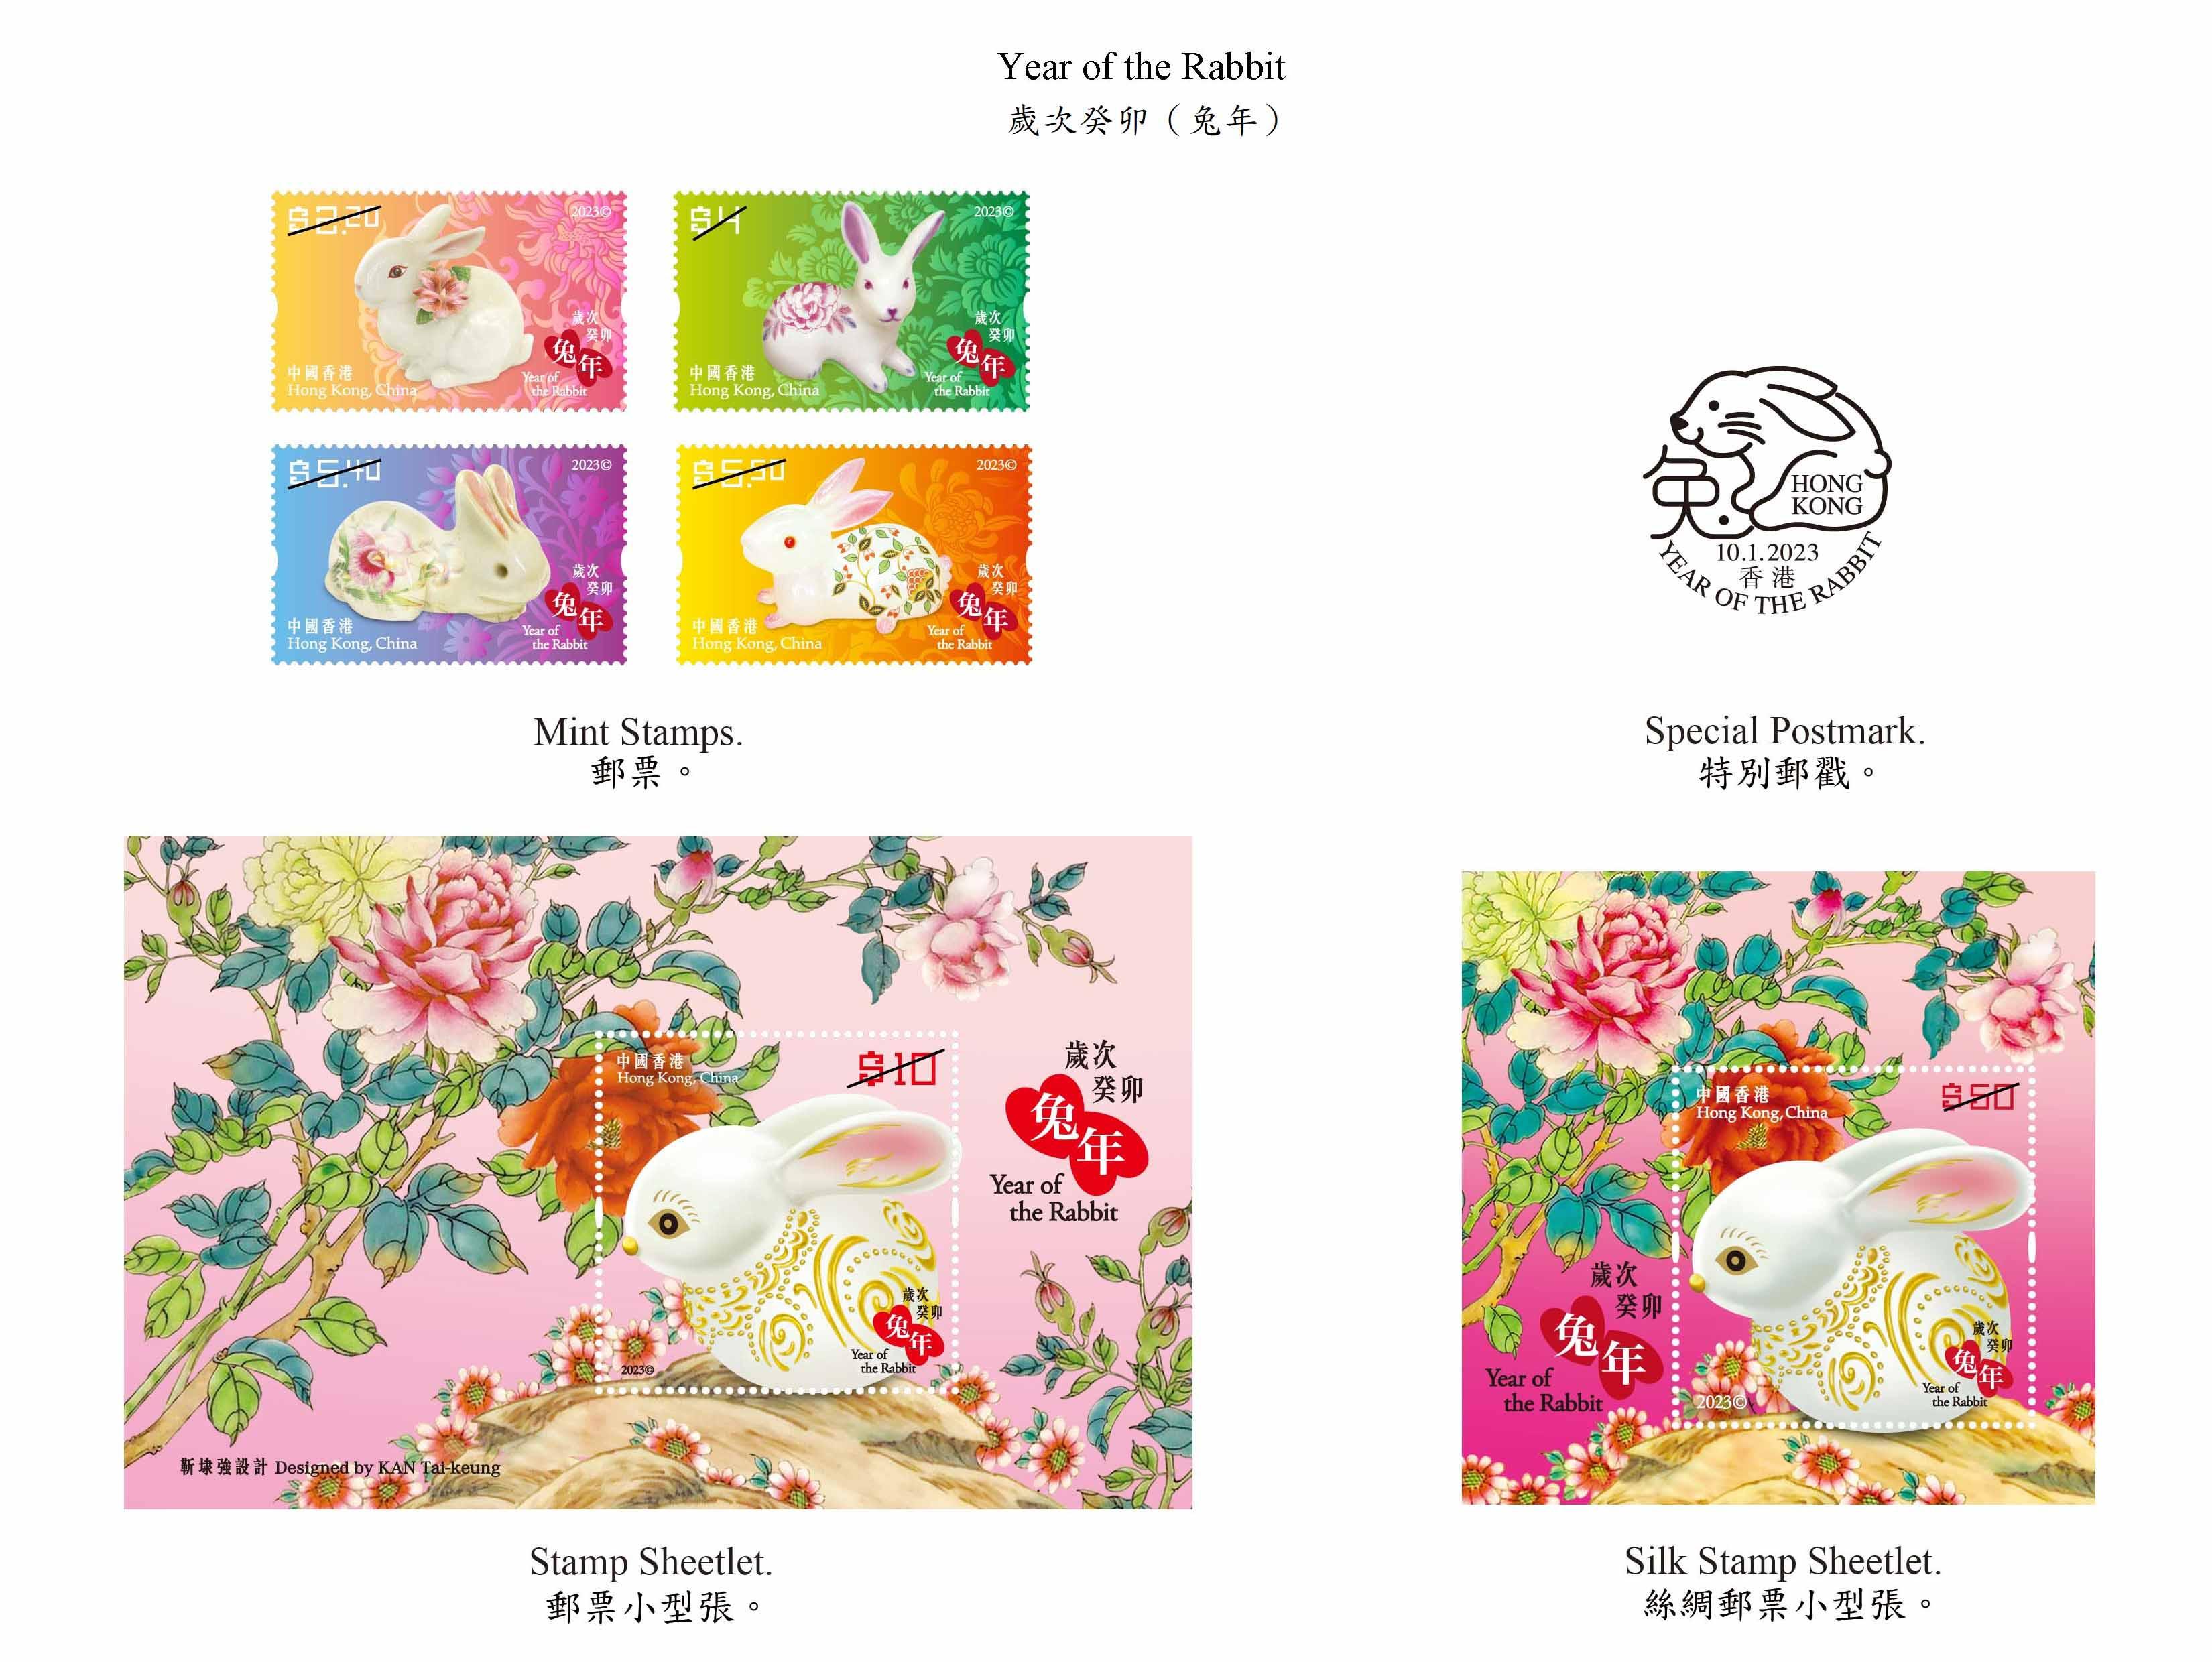 Hongkong Post will launch a special stamp issue and associated philatelic products with the theme "Year of the Rabbit" on January 10, 2023 (Tuesday). Photo shows the mint stamps, the stamp sheetlets and the special postmark.

